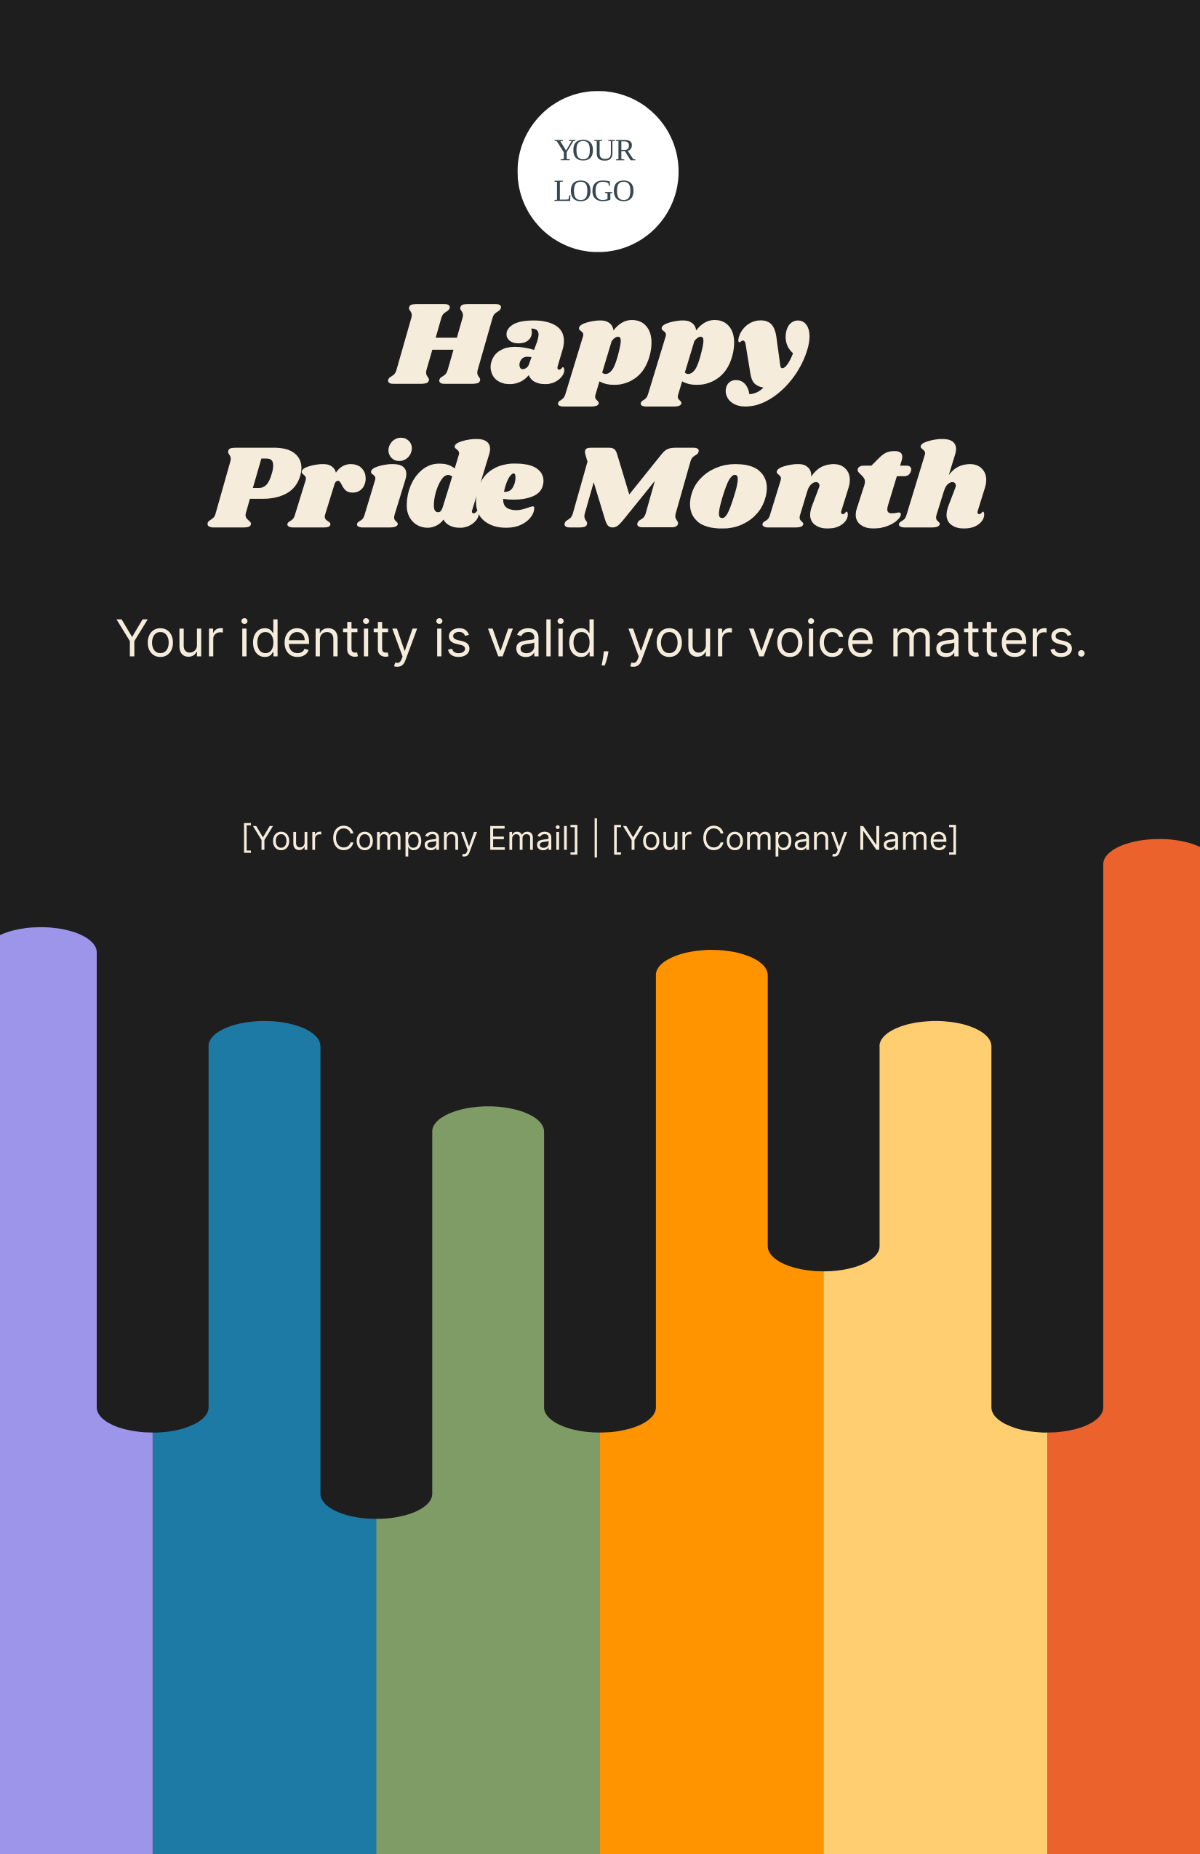 Happy Pride Month Poster Template